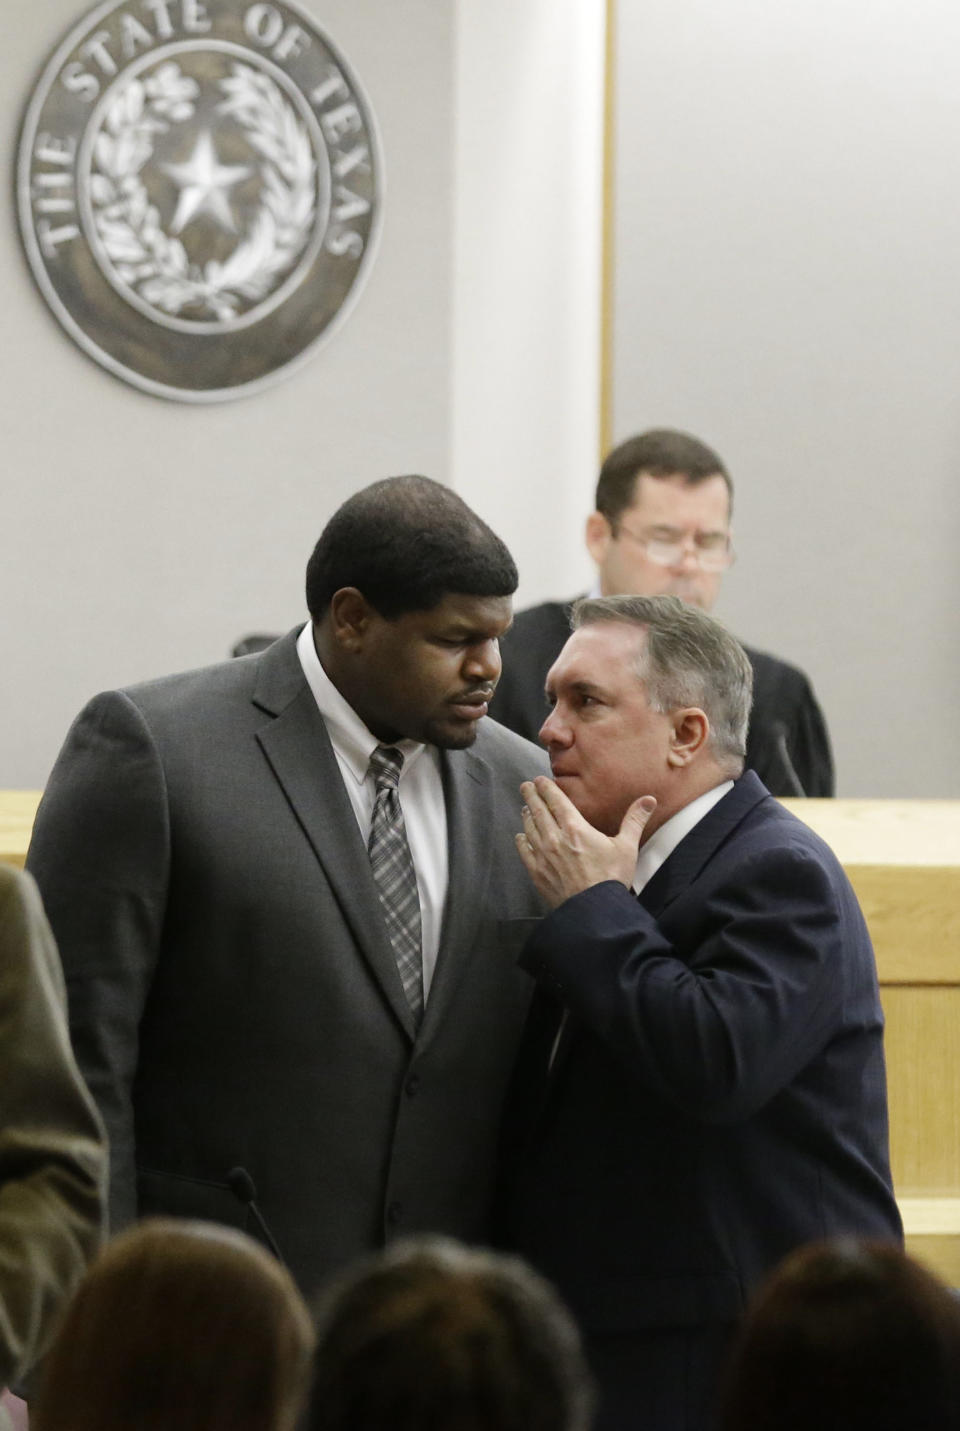 Former Dallas Cowboys' Josh Brent, left, talks with his attorney George Milner during juror selection Friday, Jan. 10, 2014, in Dallas. Jury selection continues for the upcoming trial of Brent, who's accused of killing a practice squad player in a drunken-driving wreck. Opening statements in the case are expected next week. (AP Photo/LM Otero)